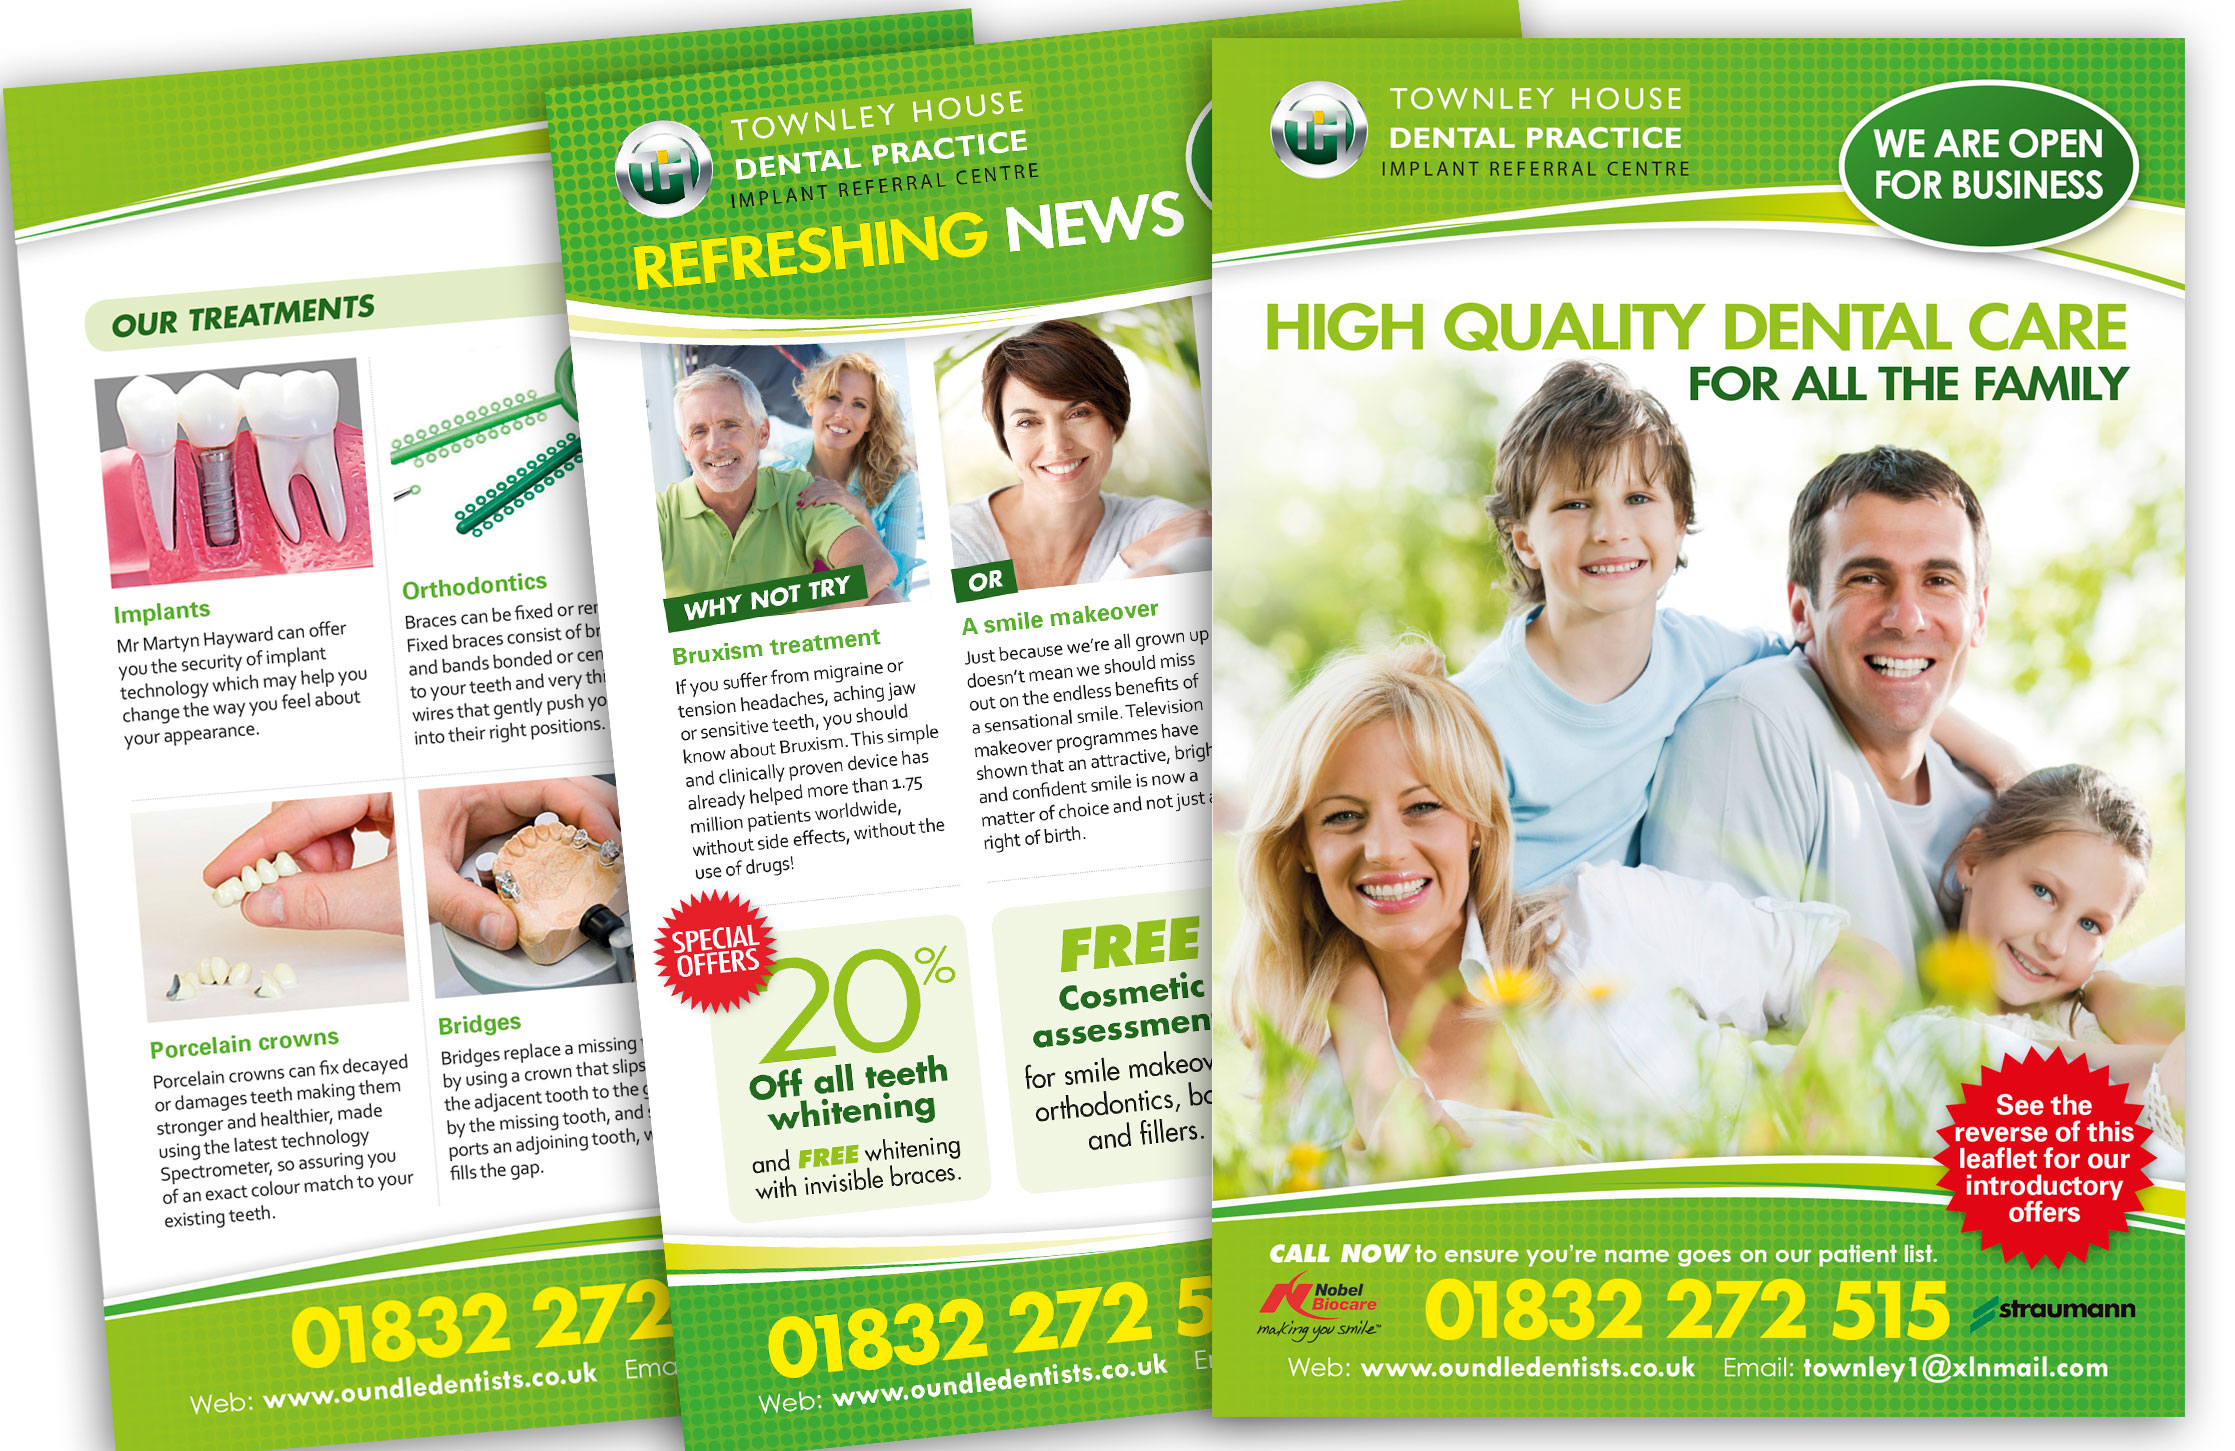 Design and artwork of a Townley House Dental Practice 4 page promotional leaflet